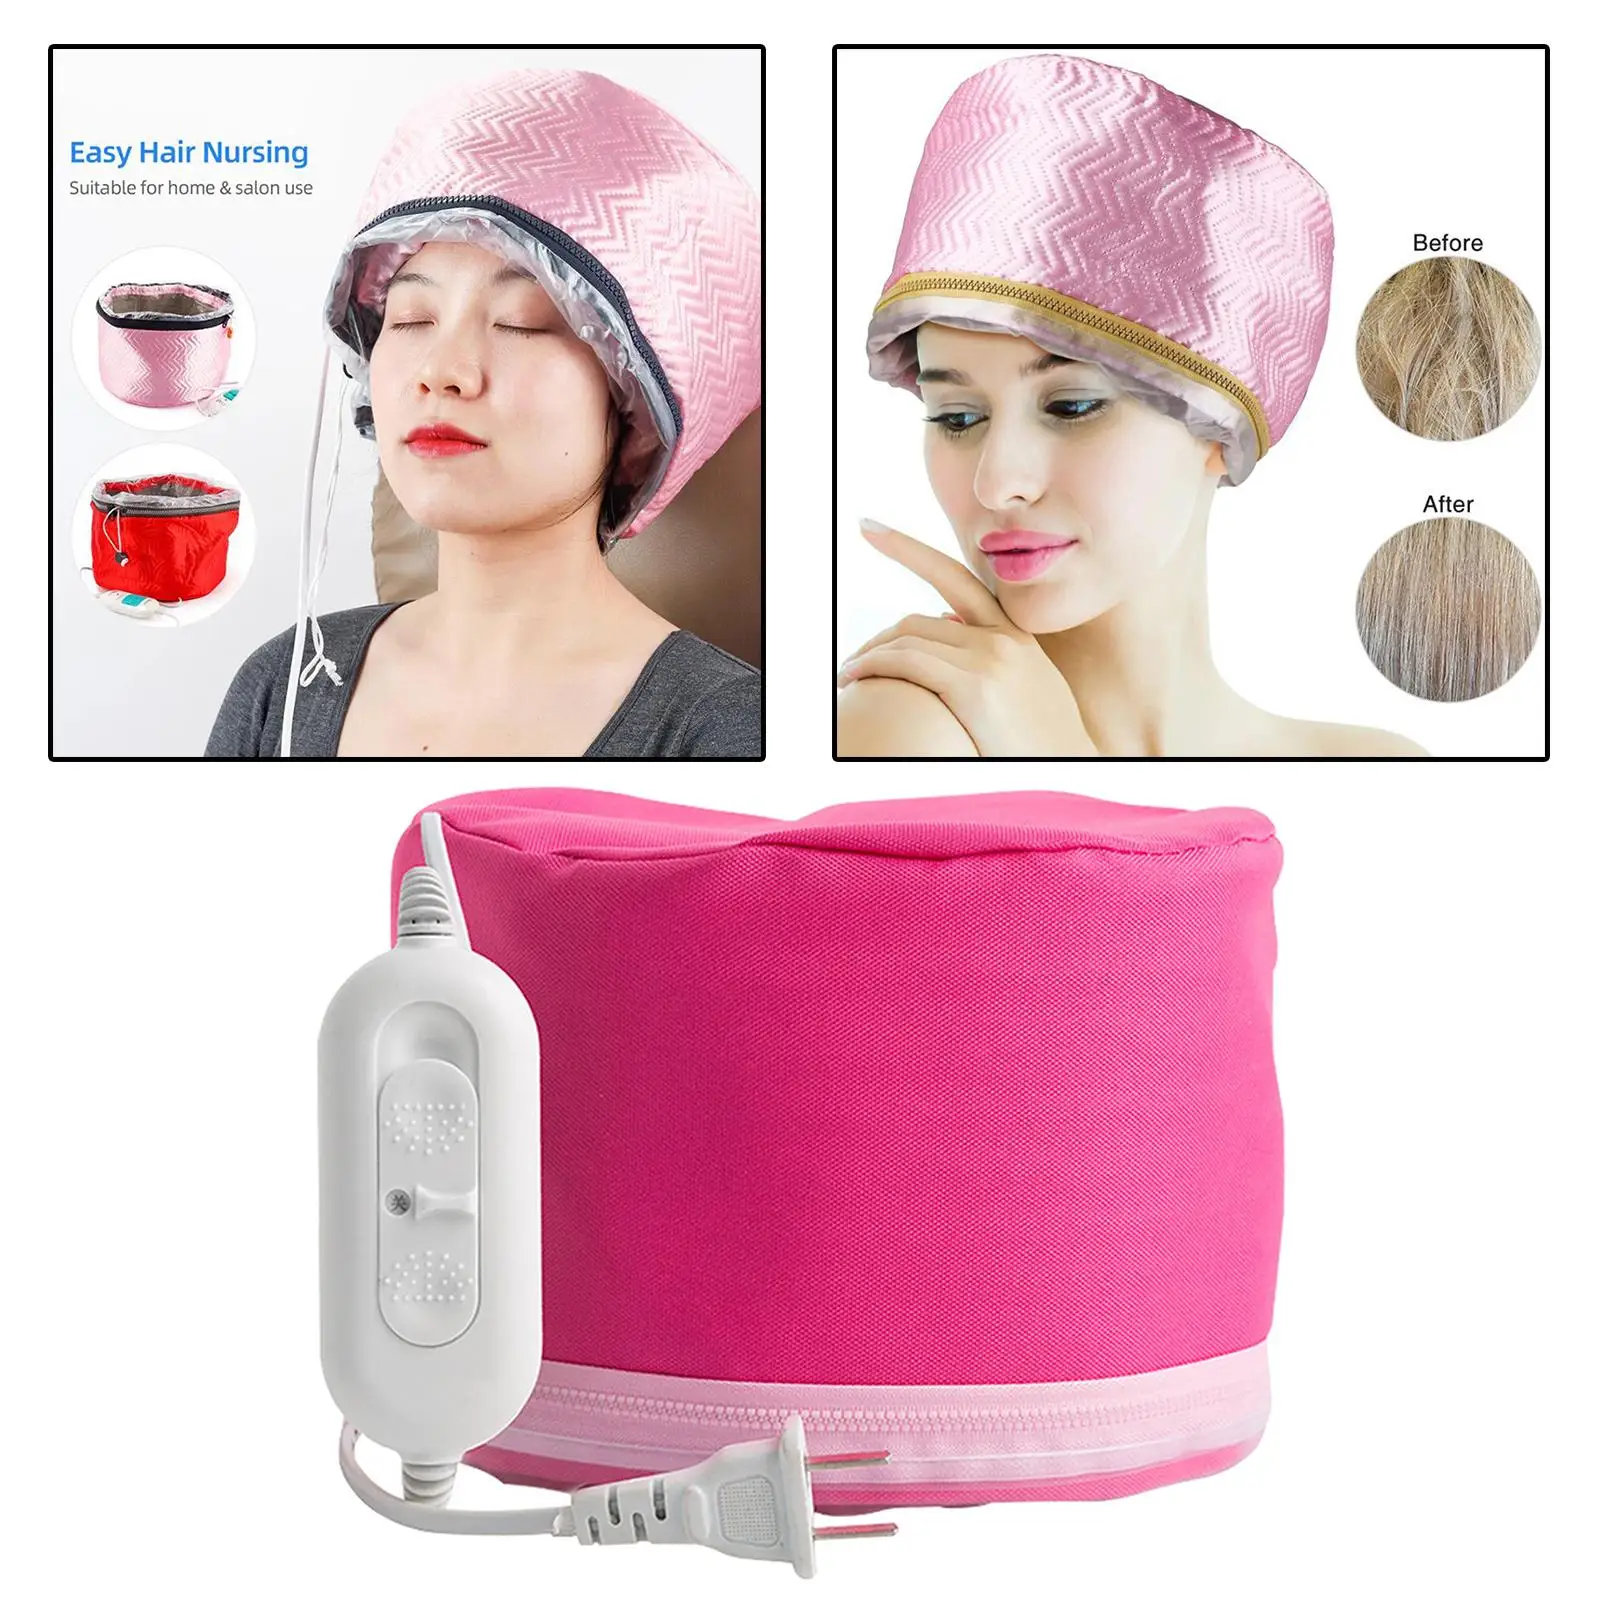 Hair Heating Caps Steamer 3-Mode Adjustable Beauty Tool Household Thermal Caps for Deep Conditioning Salon Hair Scalp Women Men